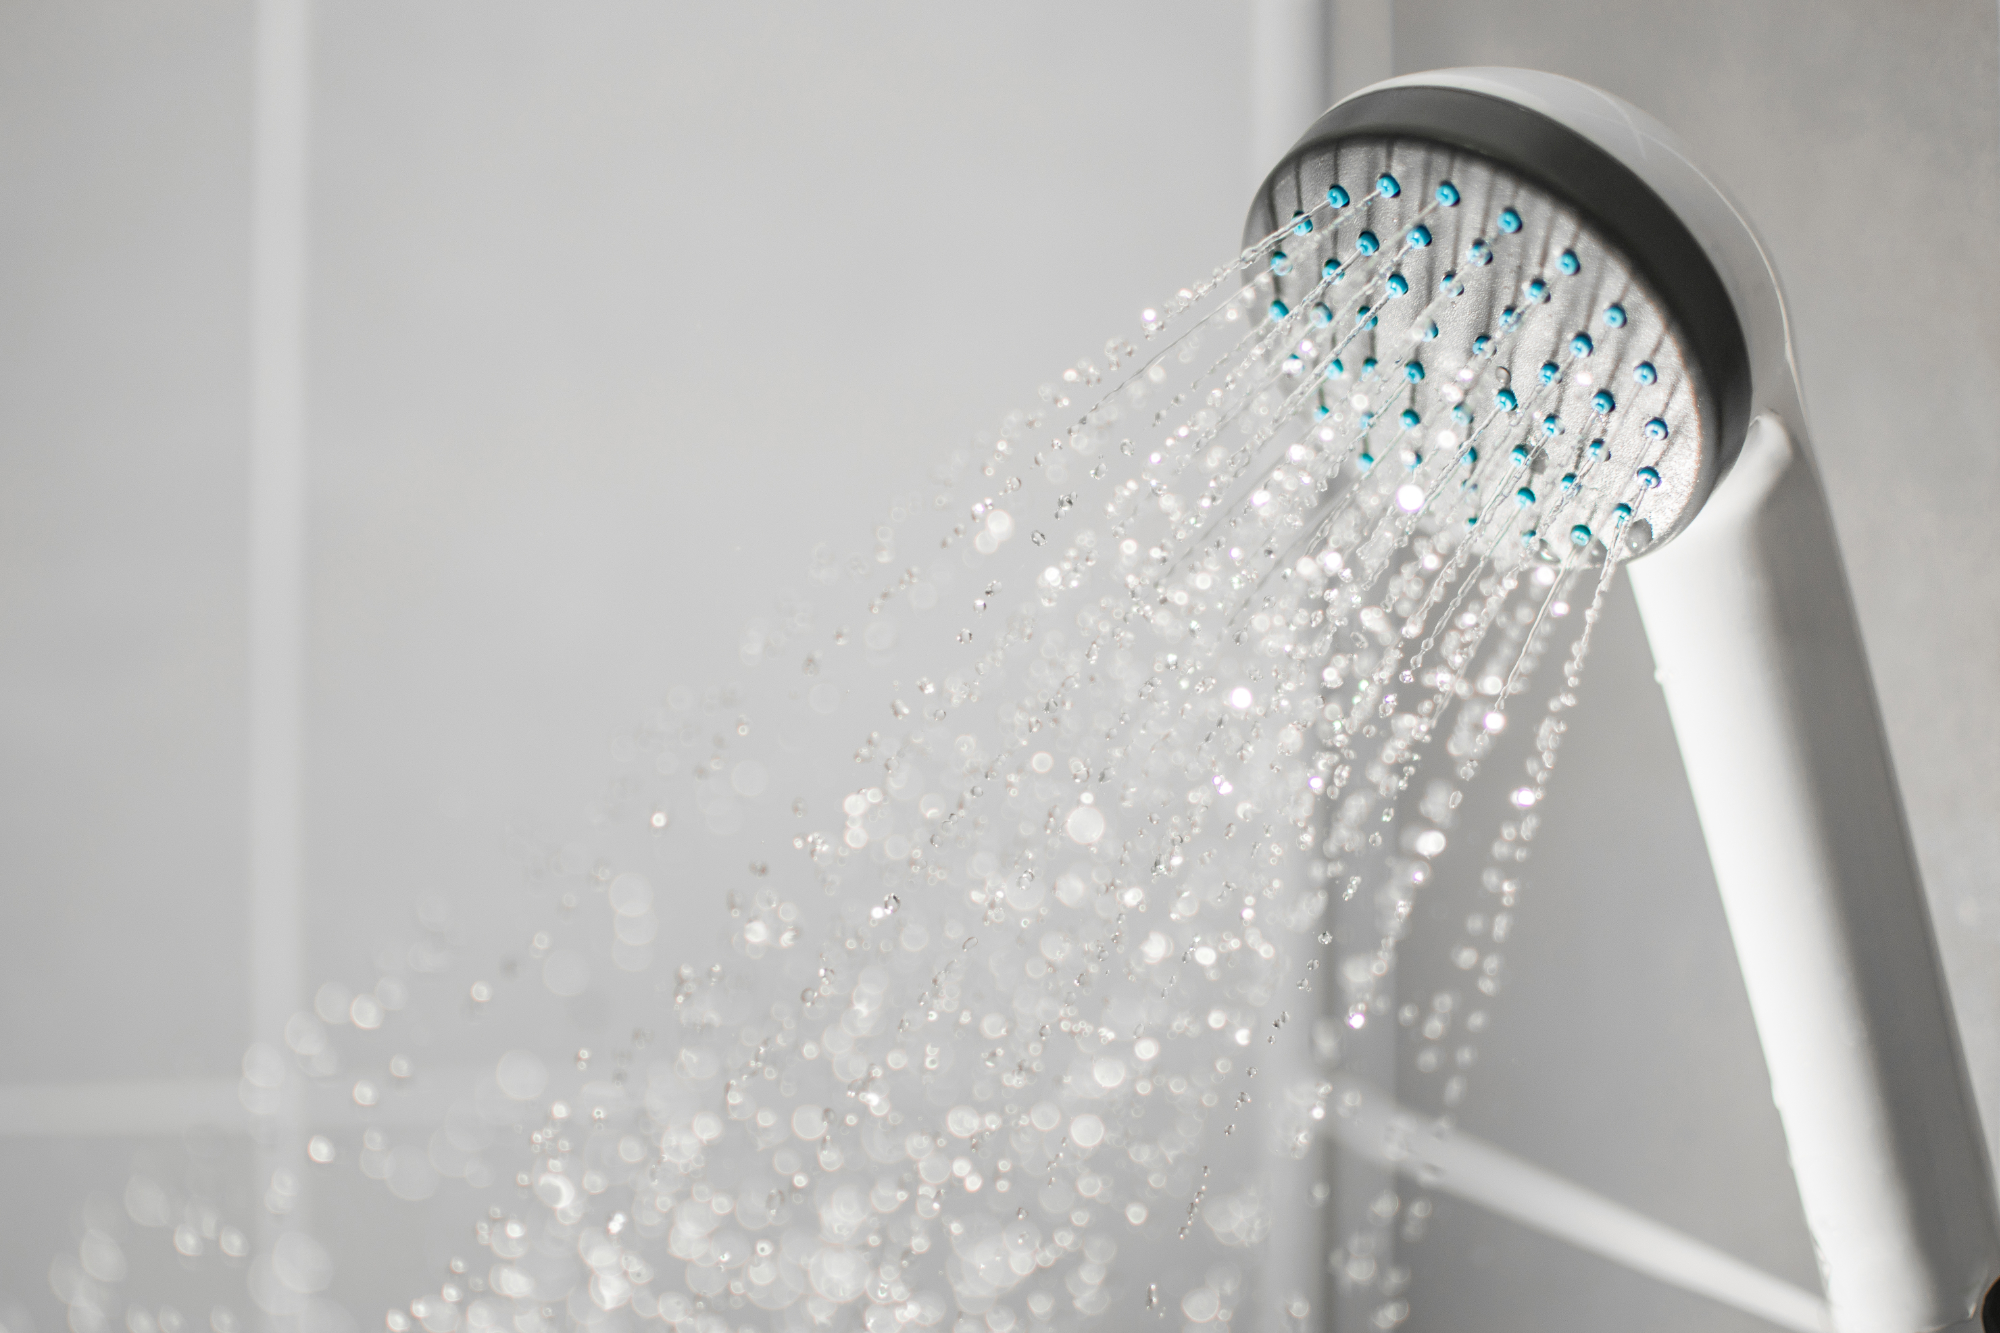 Ditch the Chlorine: Why You Should Install a Water Filter for Your Shower